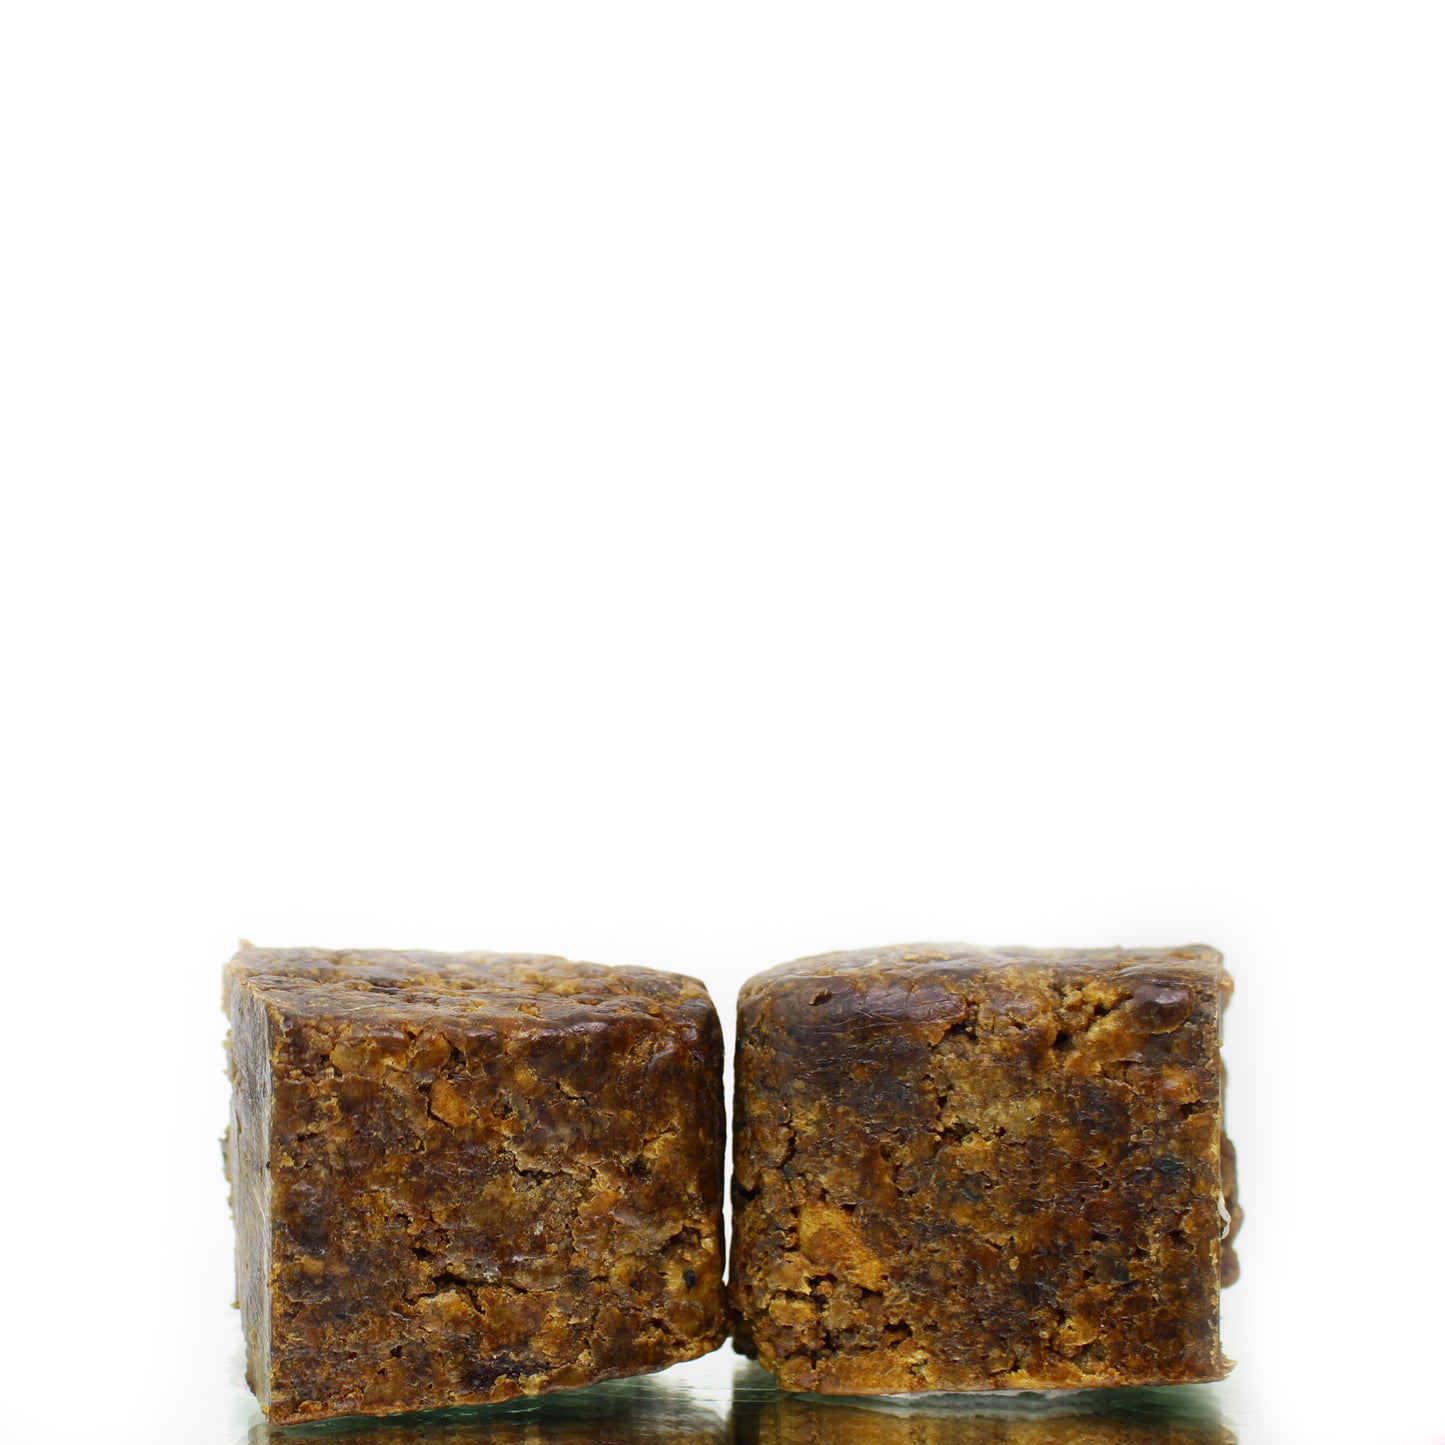 Organic Authentic African Black Soap from Ghana For Acne, Psoriasis, Shampoo etc